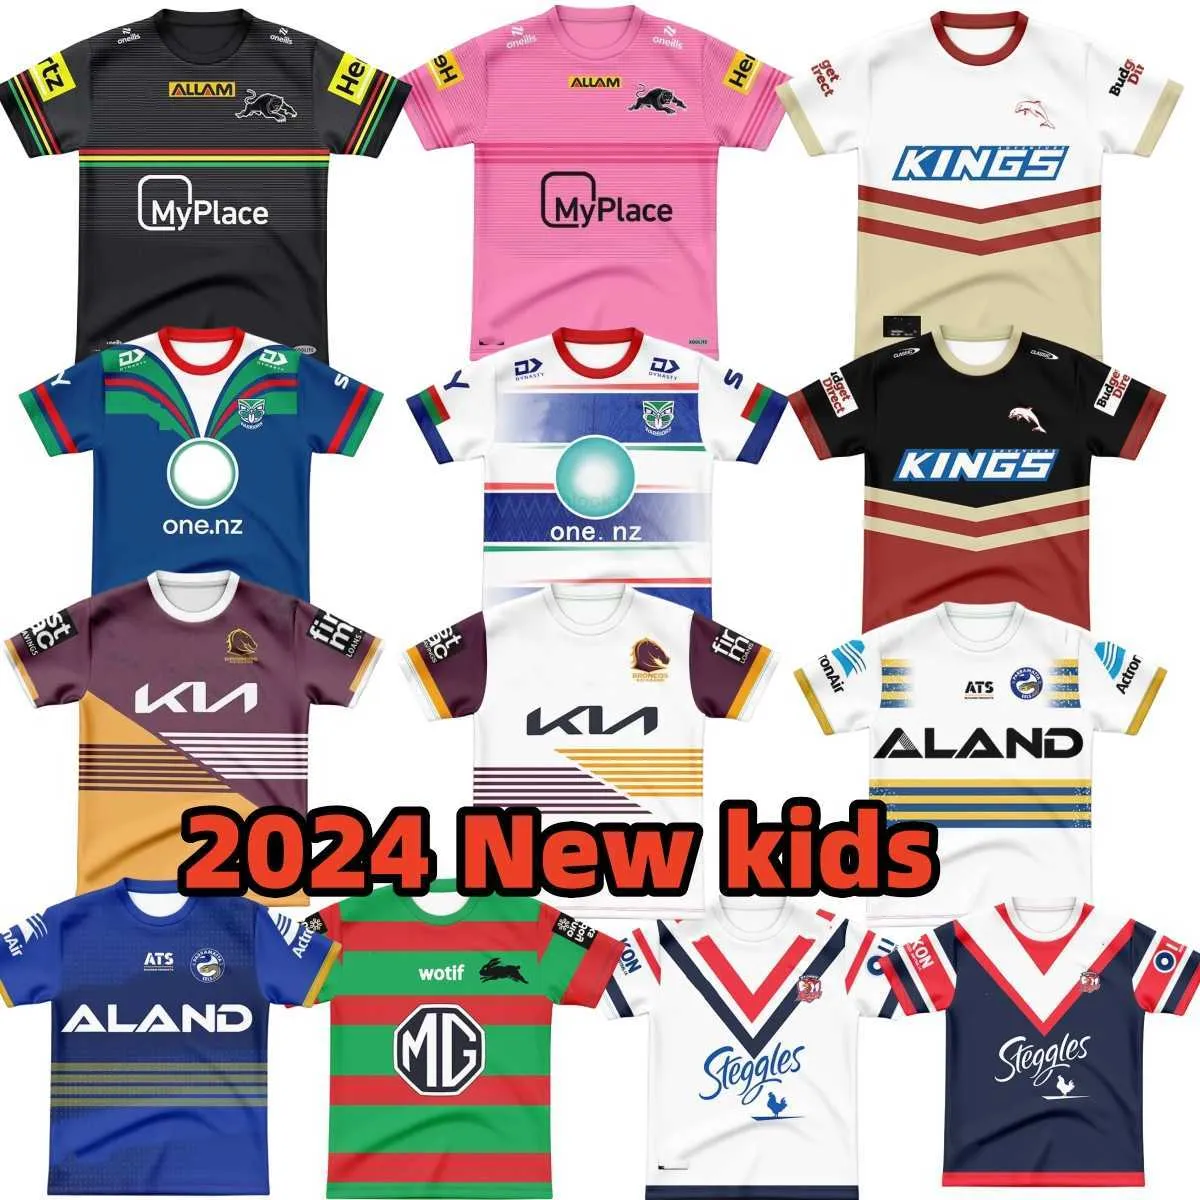 2024 kids Penrith Panthers Dolphins rugby Jerseys Eels Broncos rabbit Titans Dolphins Sea Eagles STORM Brisbane ROOSTERS Warrior kids 2024 rugby Jerseys shirts